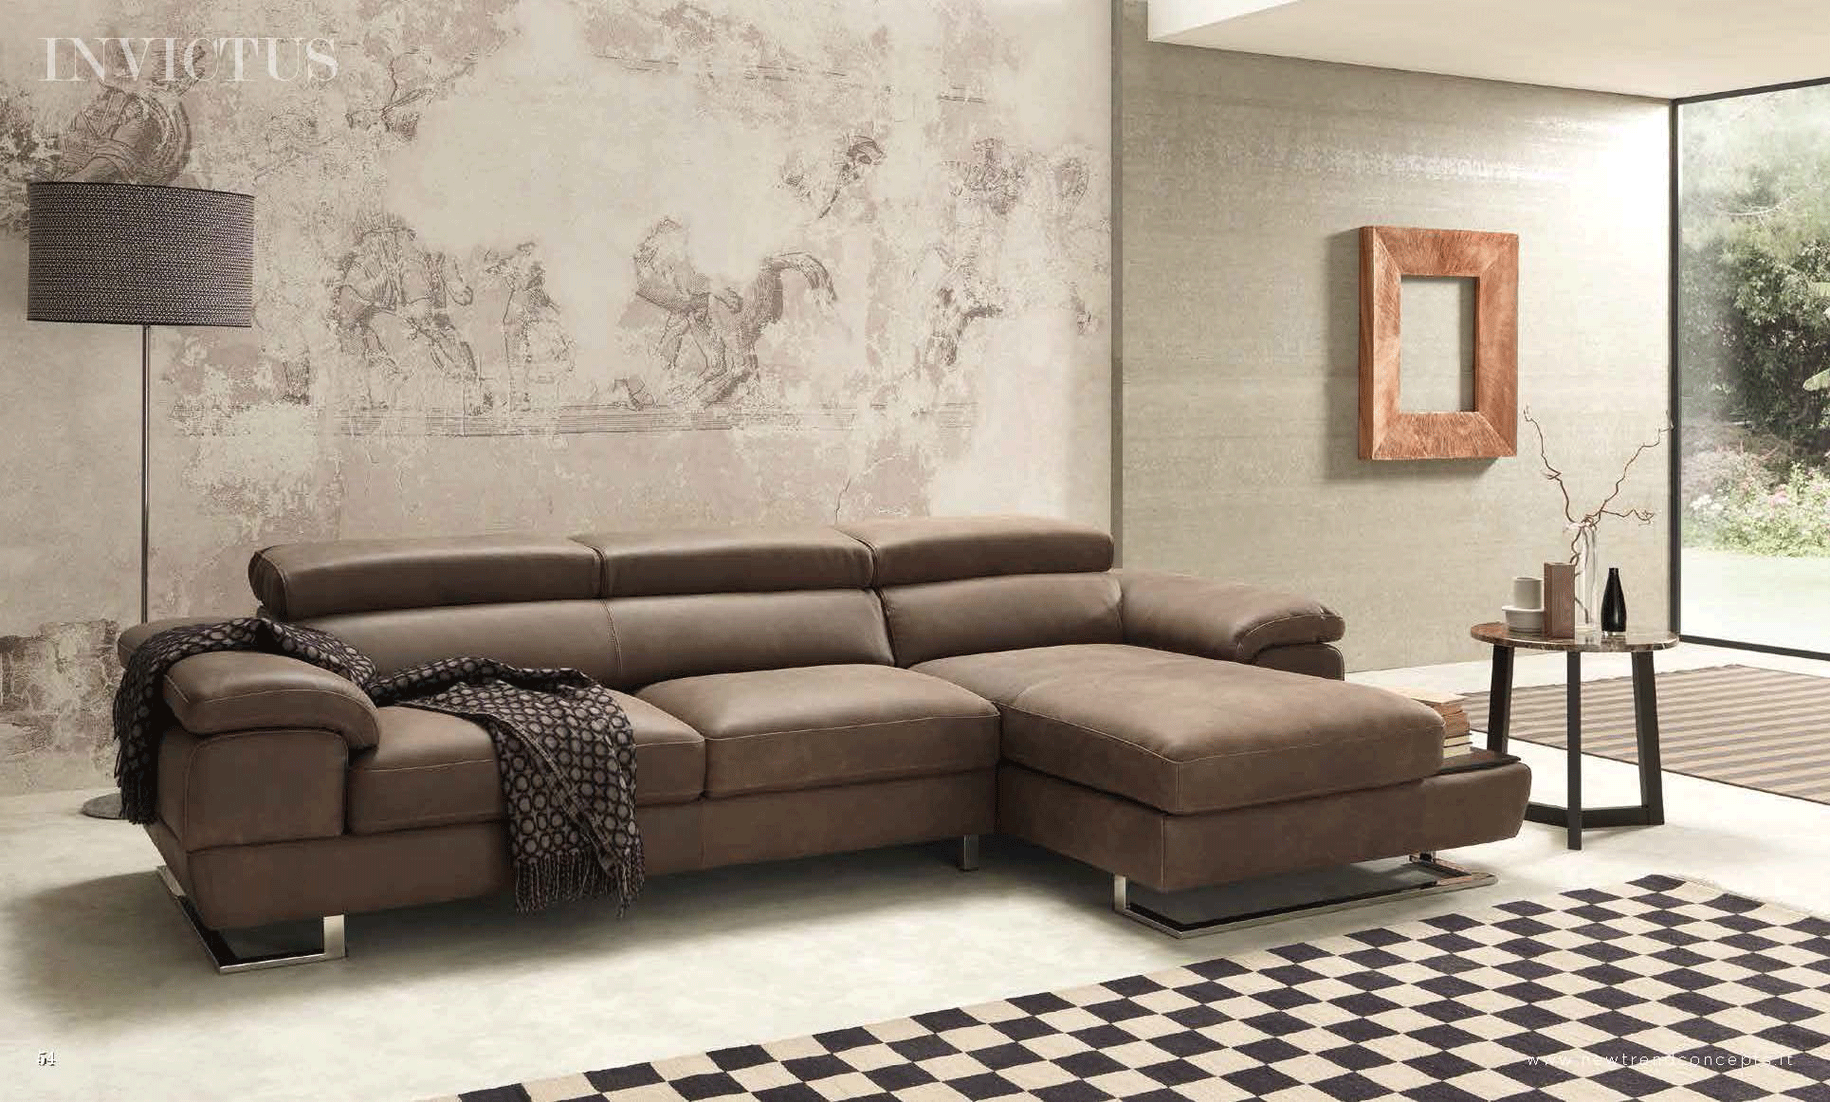 Living Room Furniture Sofas Loveseats and Chairs Invictus